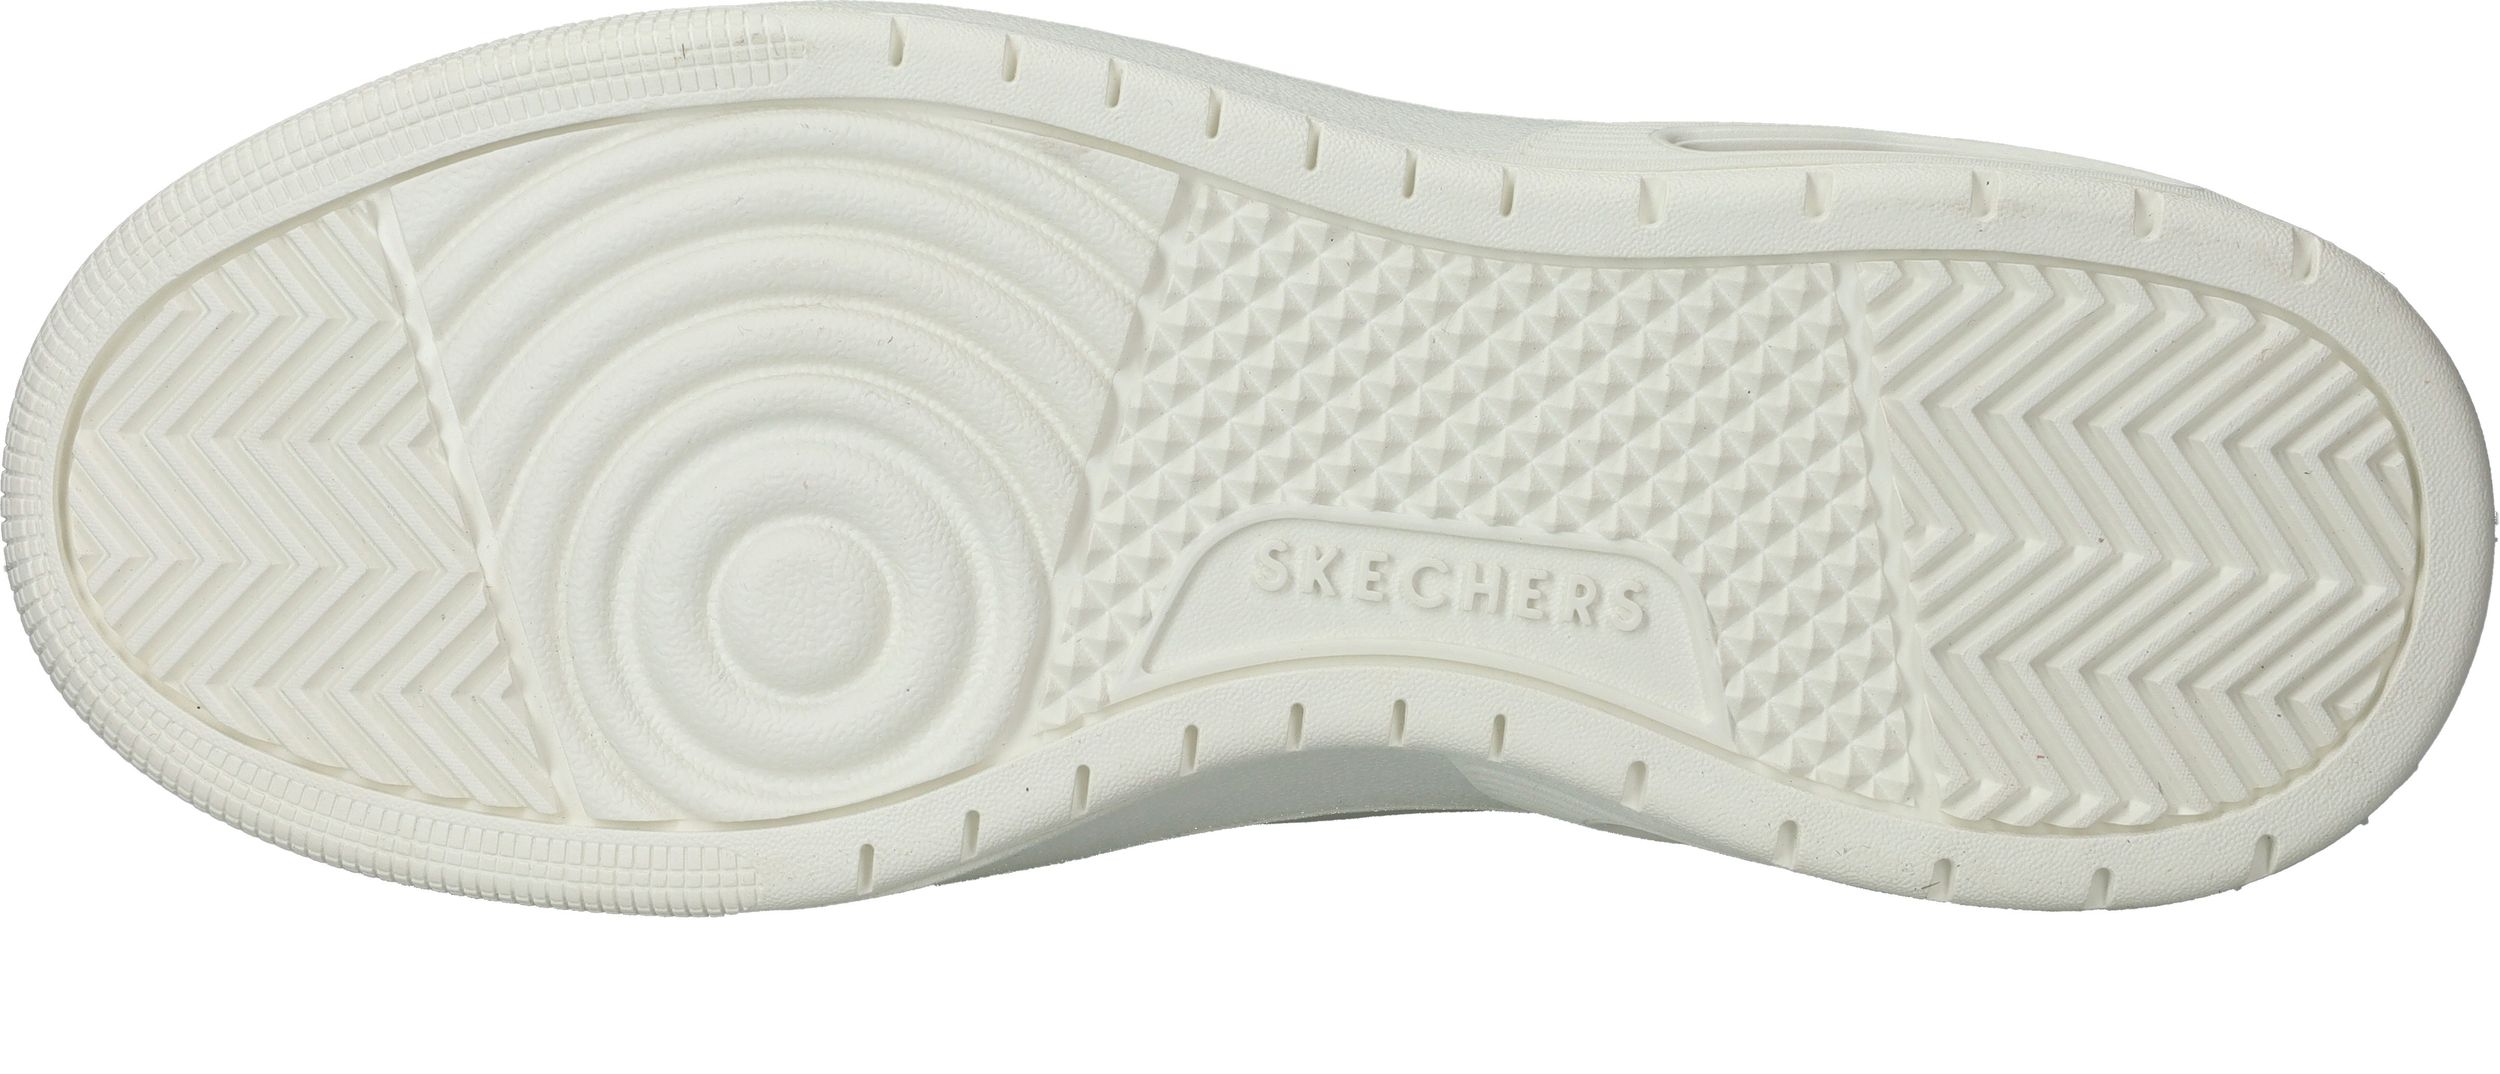 Durlinger Skechers Uno Court Courted Air